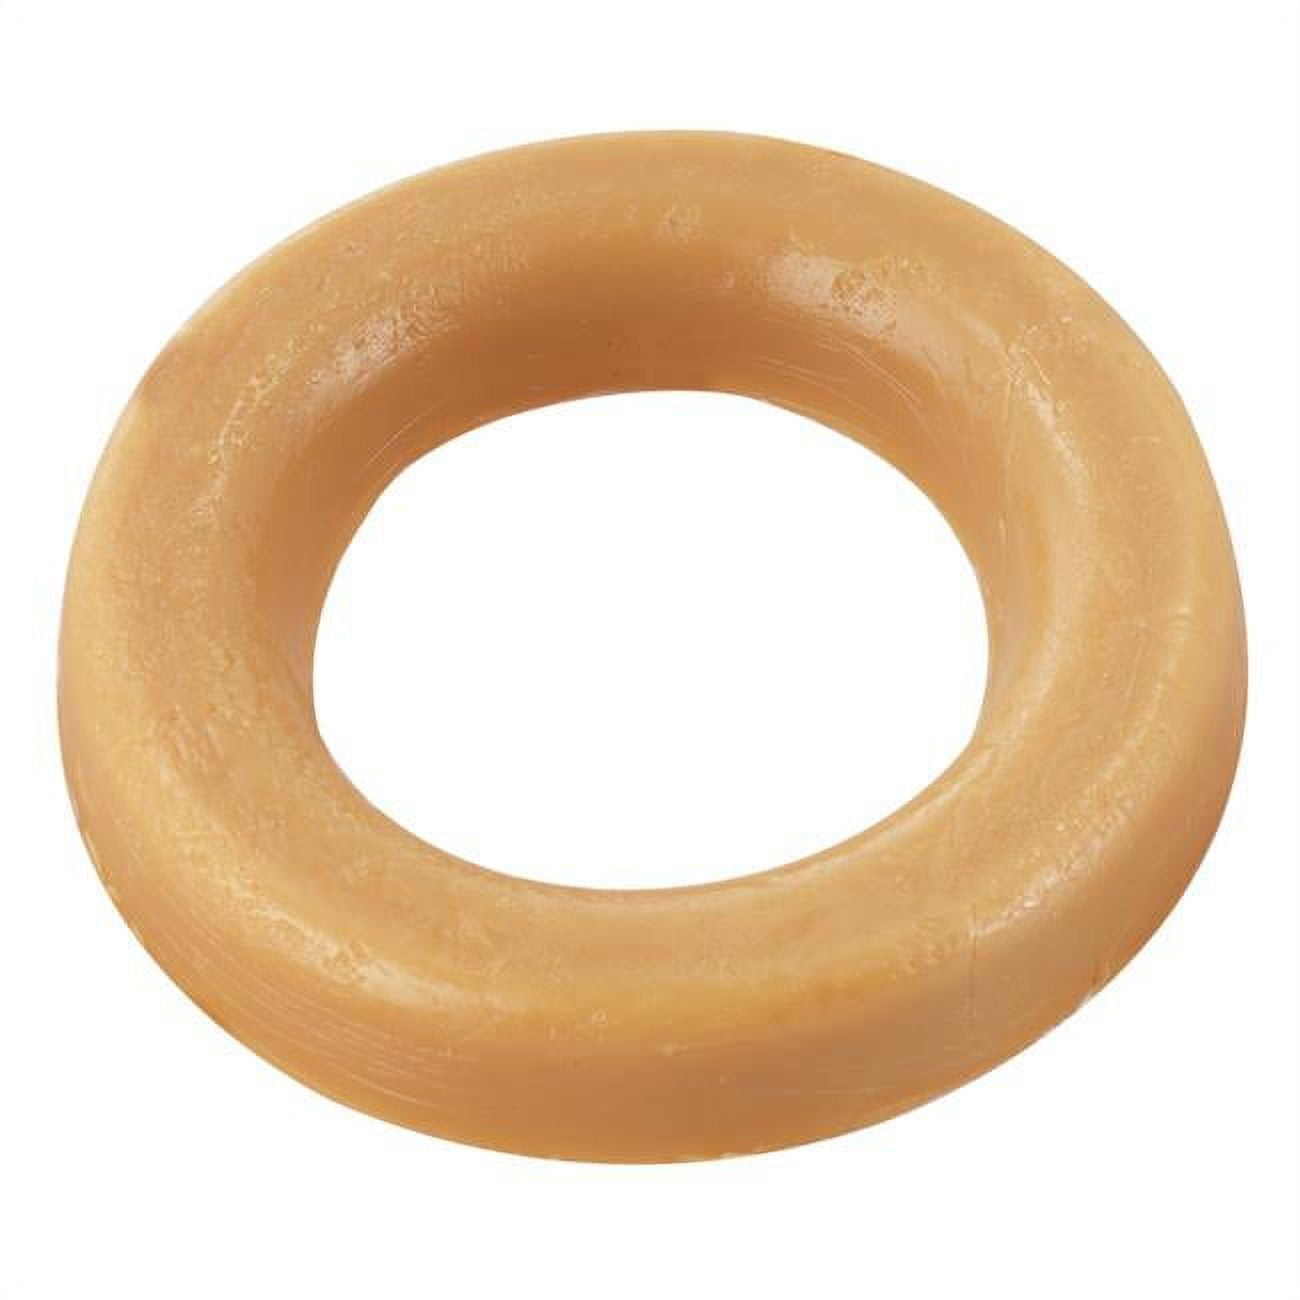 Thrifco Plumbing 4544025 Extra Thick Toilet Bowl Gasket Wax Ring with  Plastic Flange for 3 Inch and 4 Inch Waste Lines - 04480 